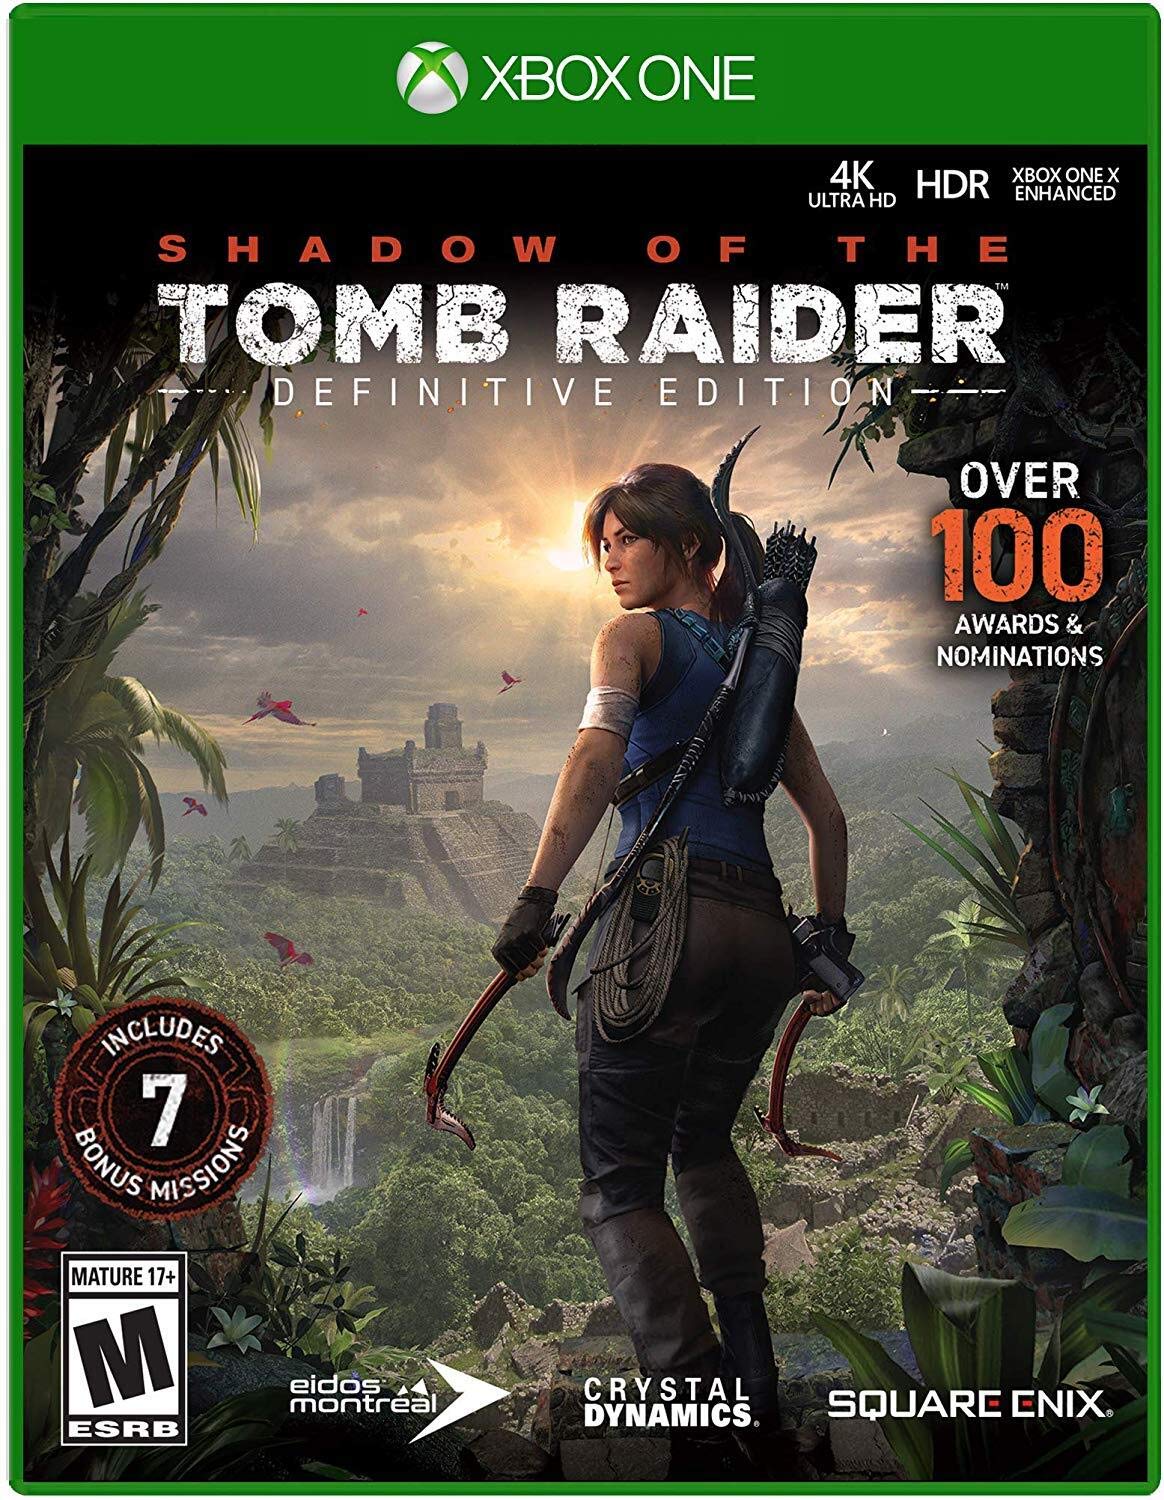 Shadow of the tomb raider definitive edition - xbox series x